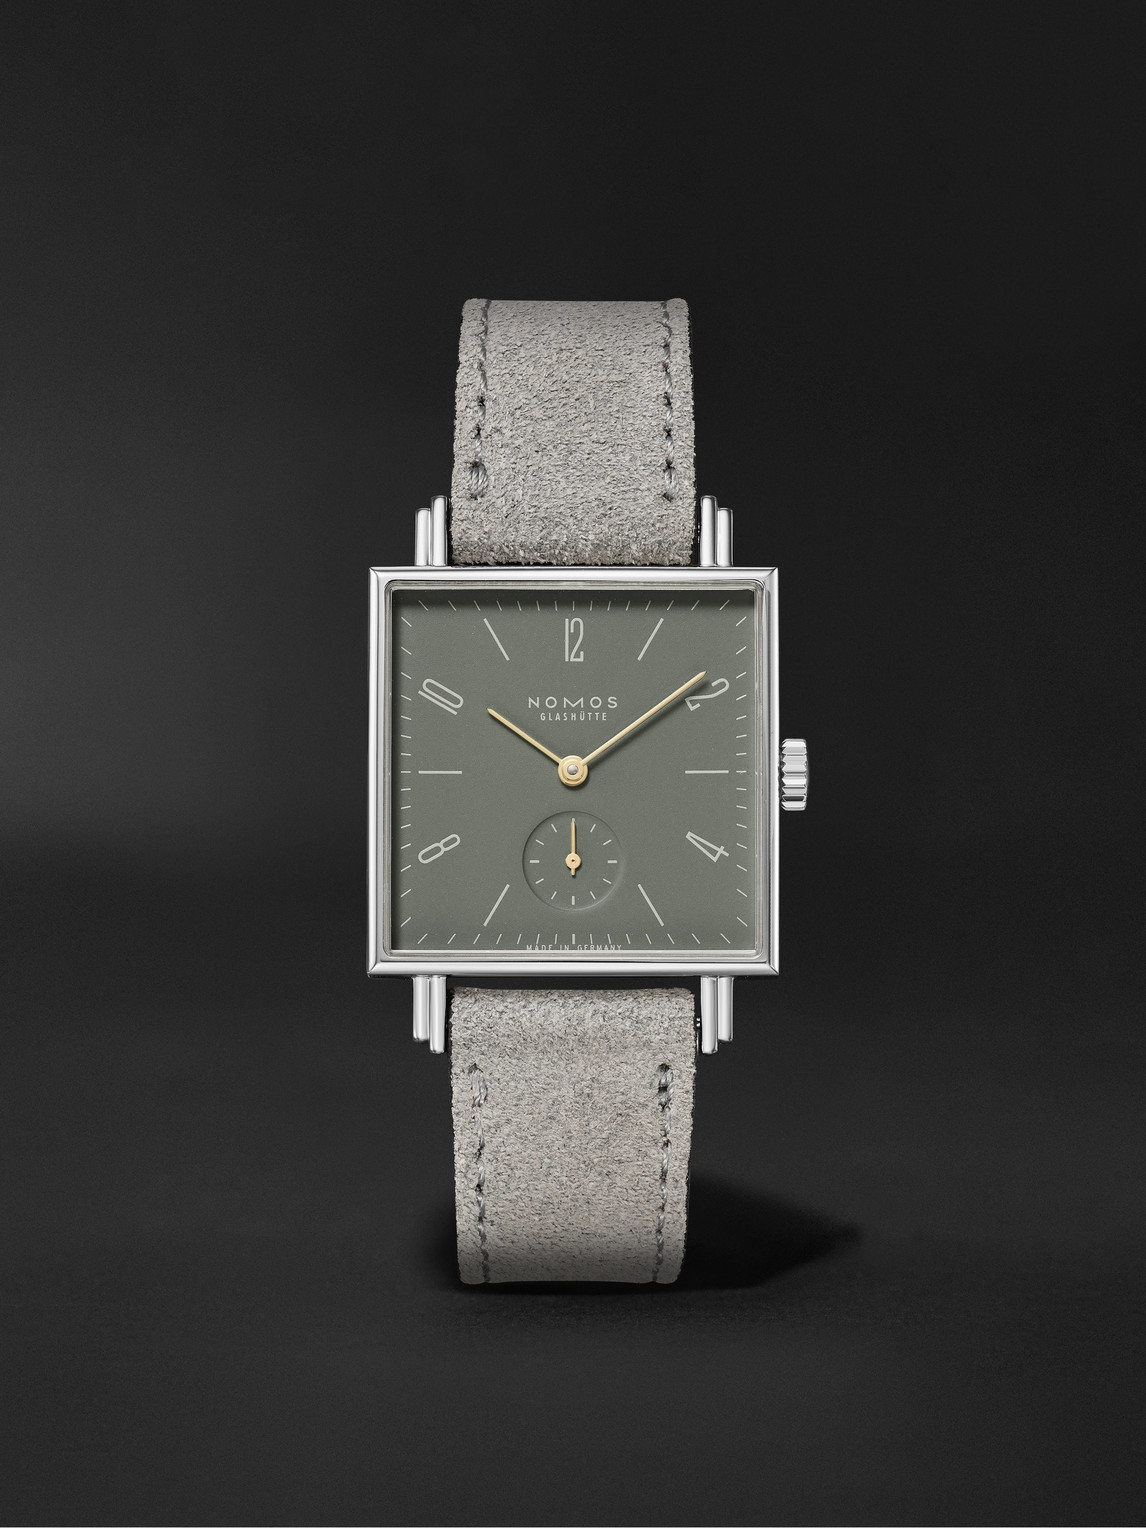 Nomos Glashütte Tetra Ode To Joy Hand-wound 29.5mm Stainless Steel And Leather Watch, Ref. No. 445 In Gray